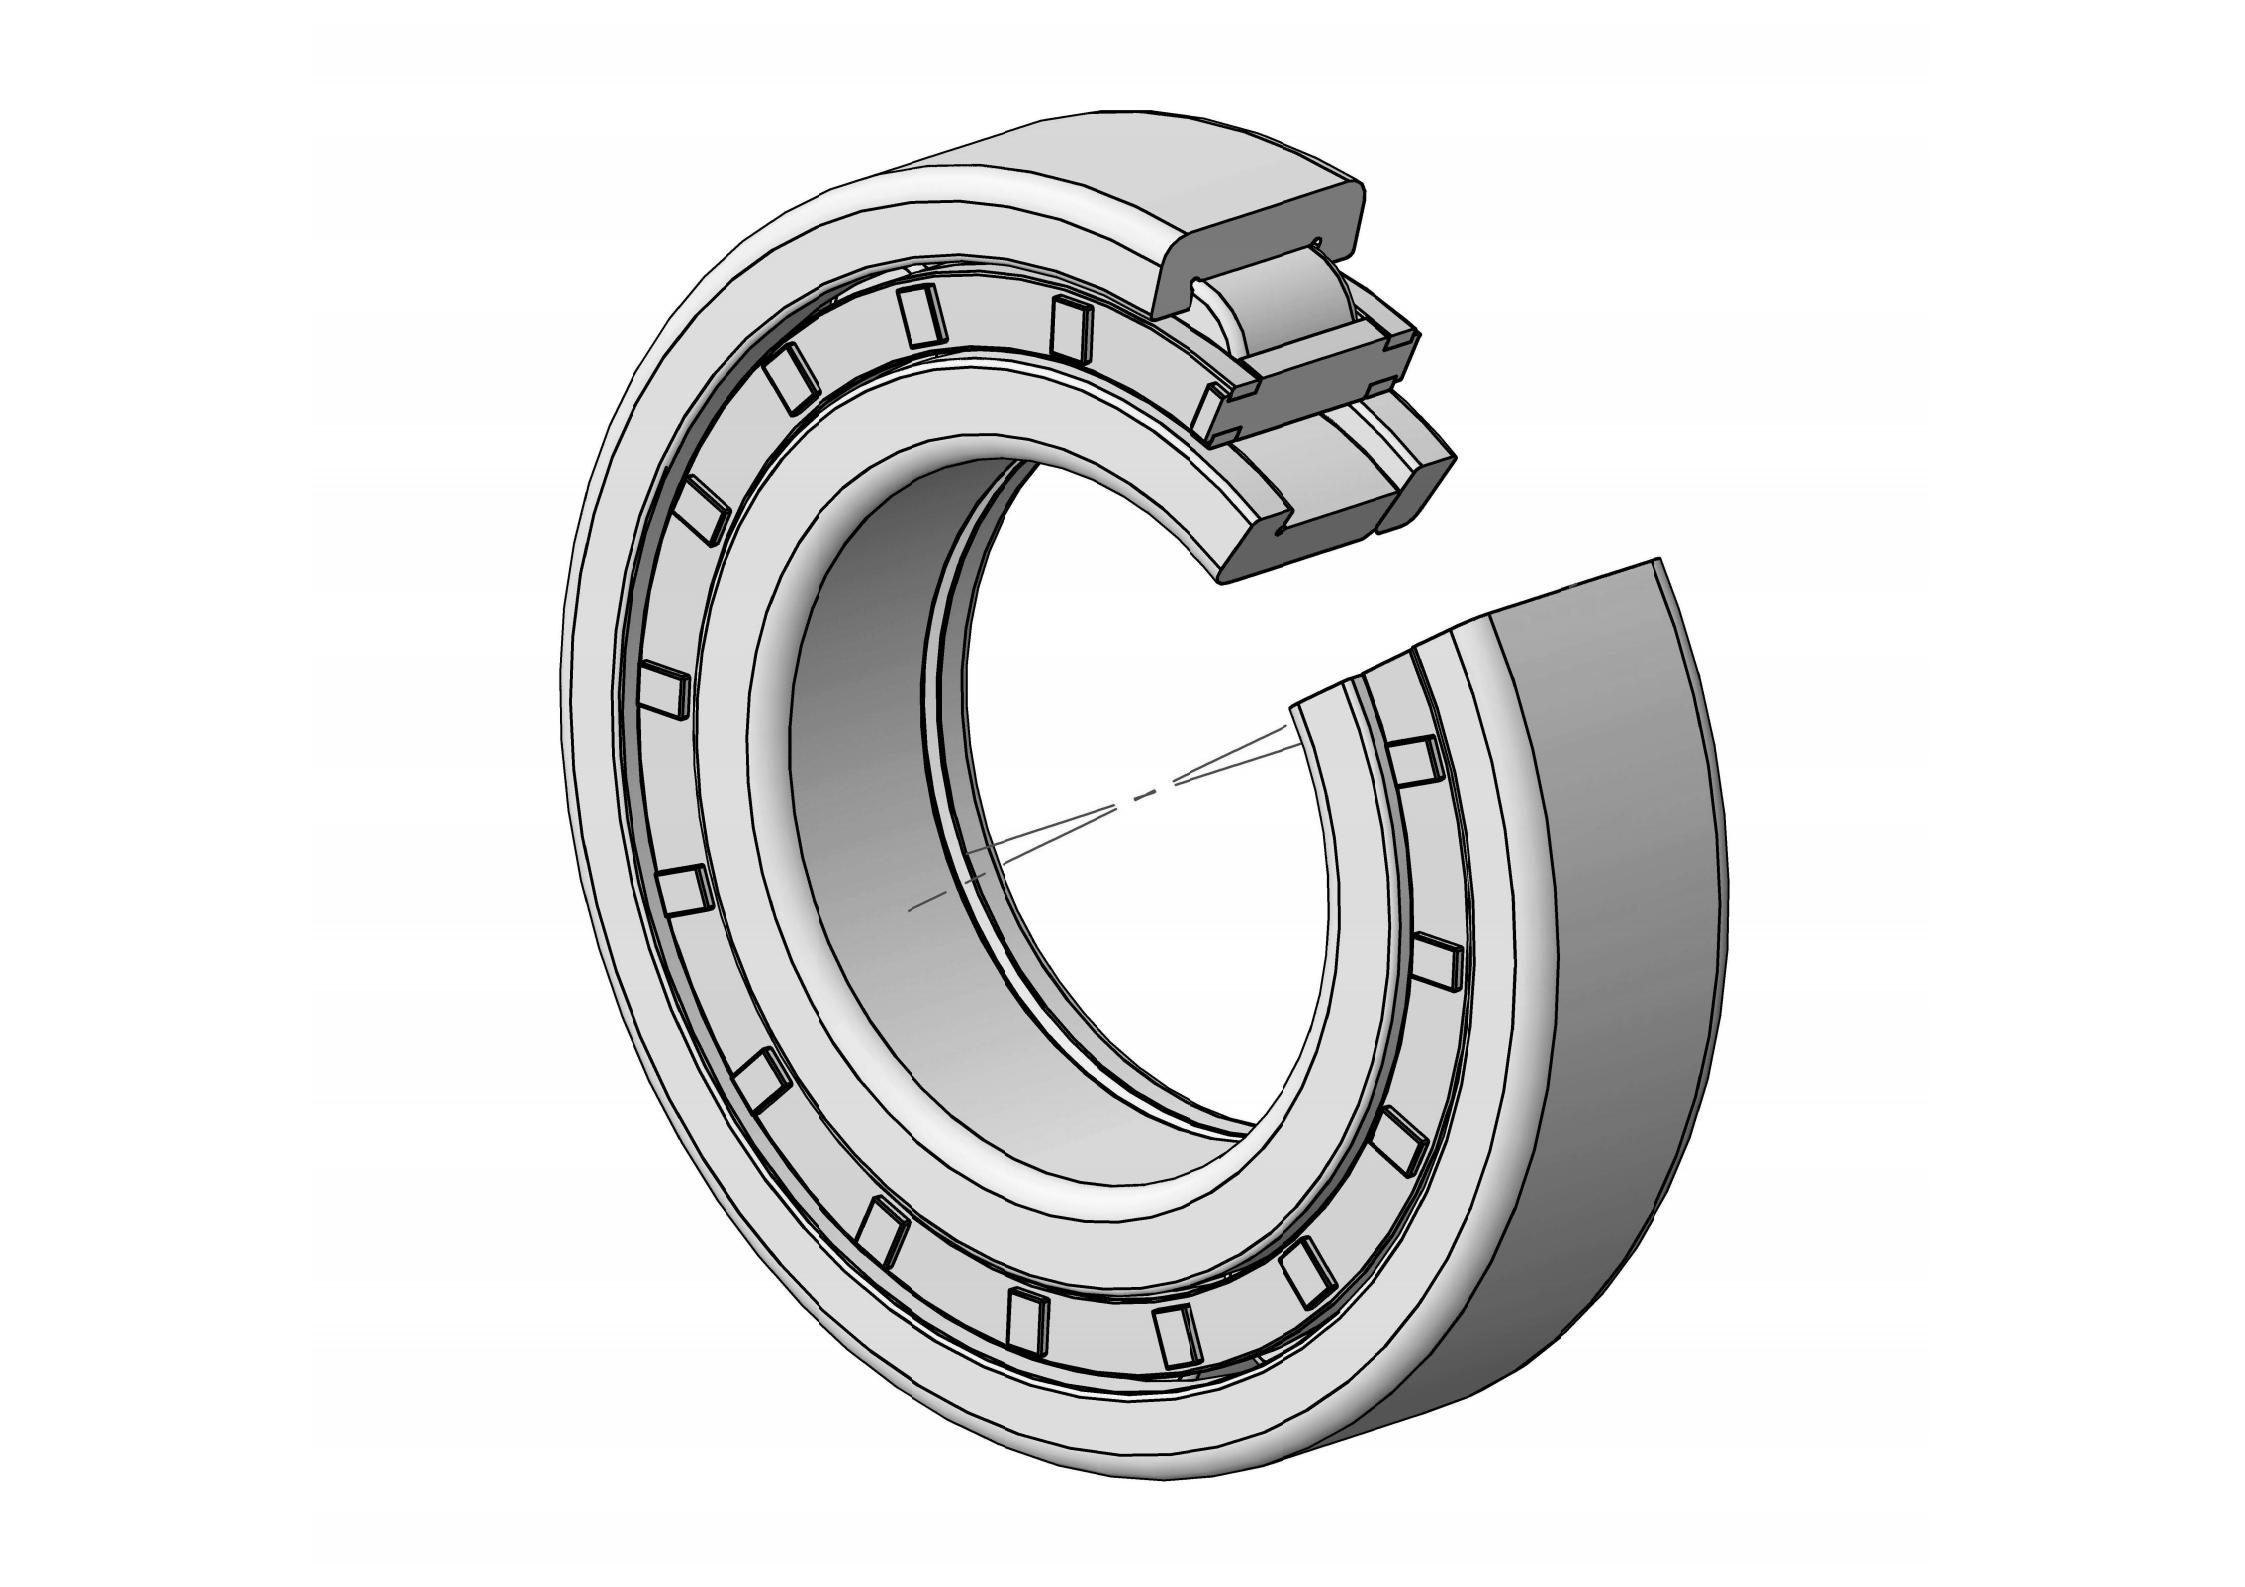 NUP2319-EM Single Row Cylindrical roller bearing 